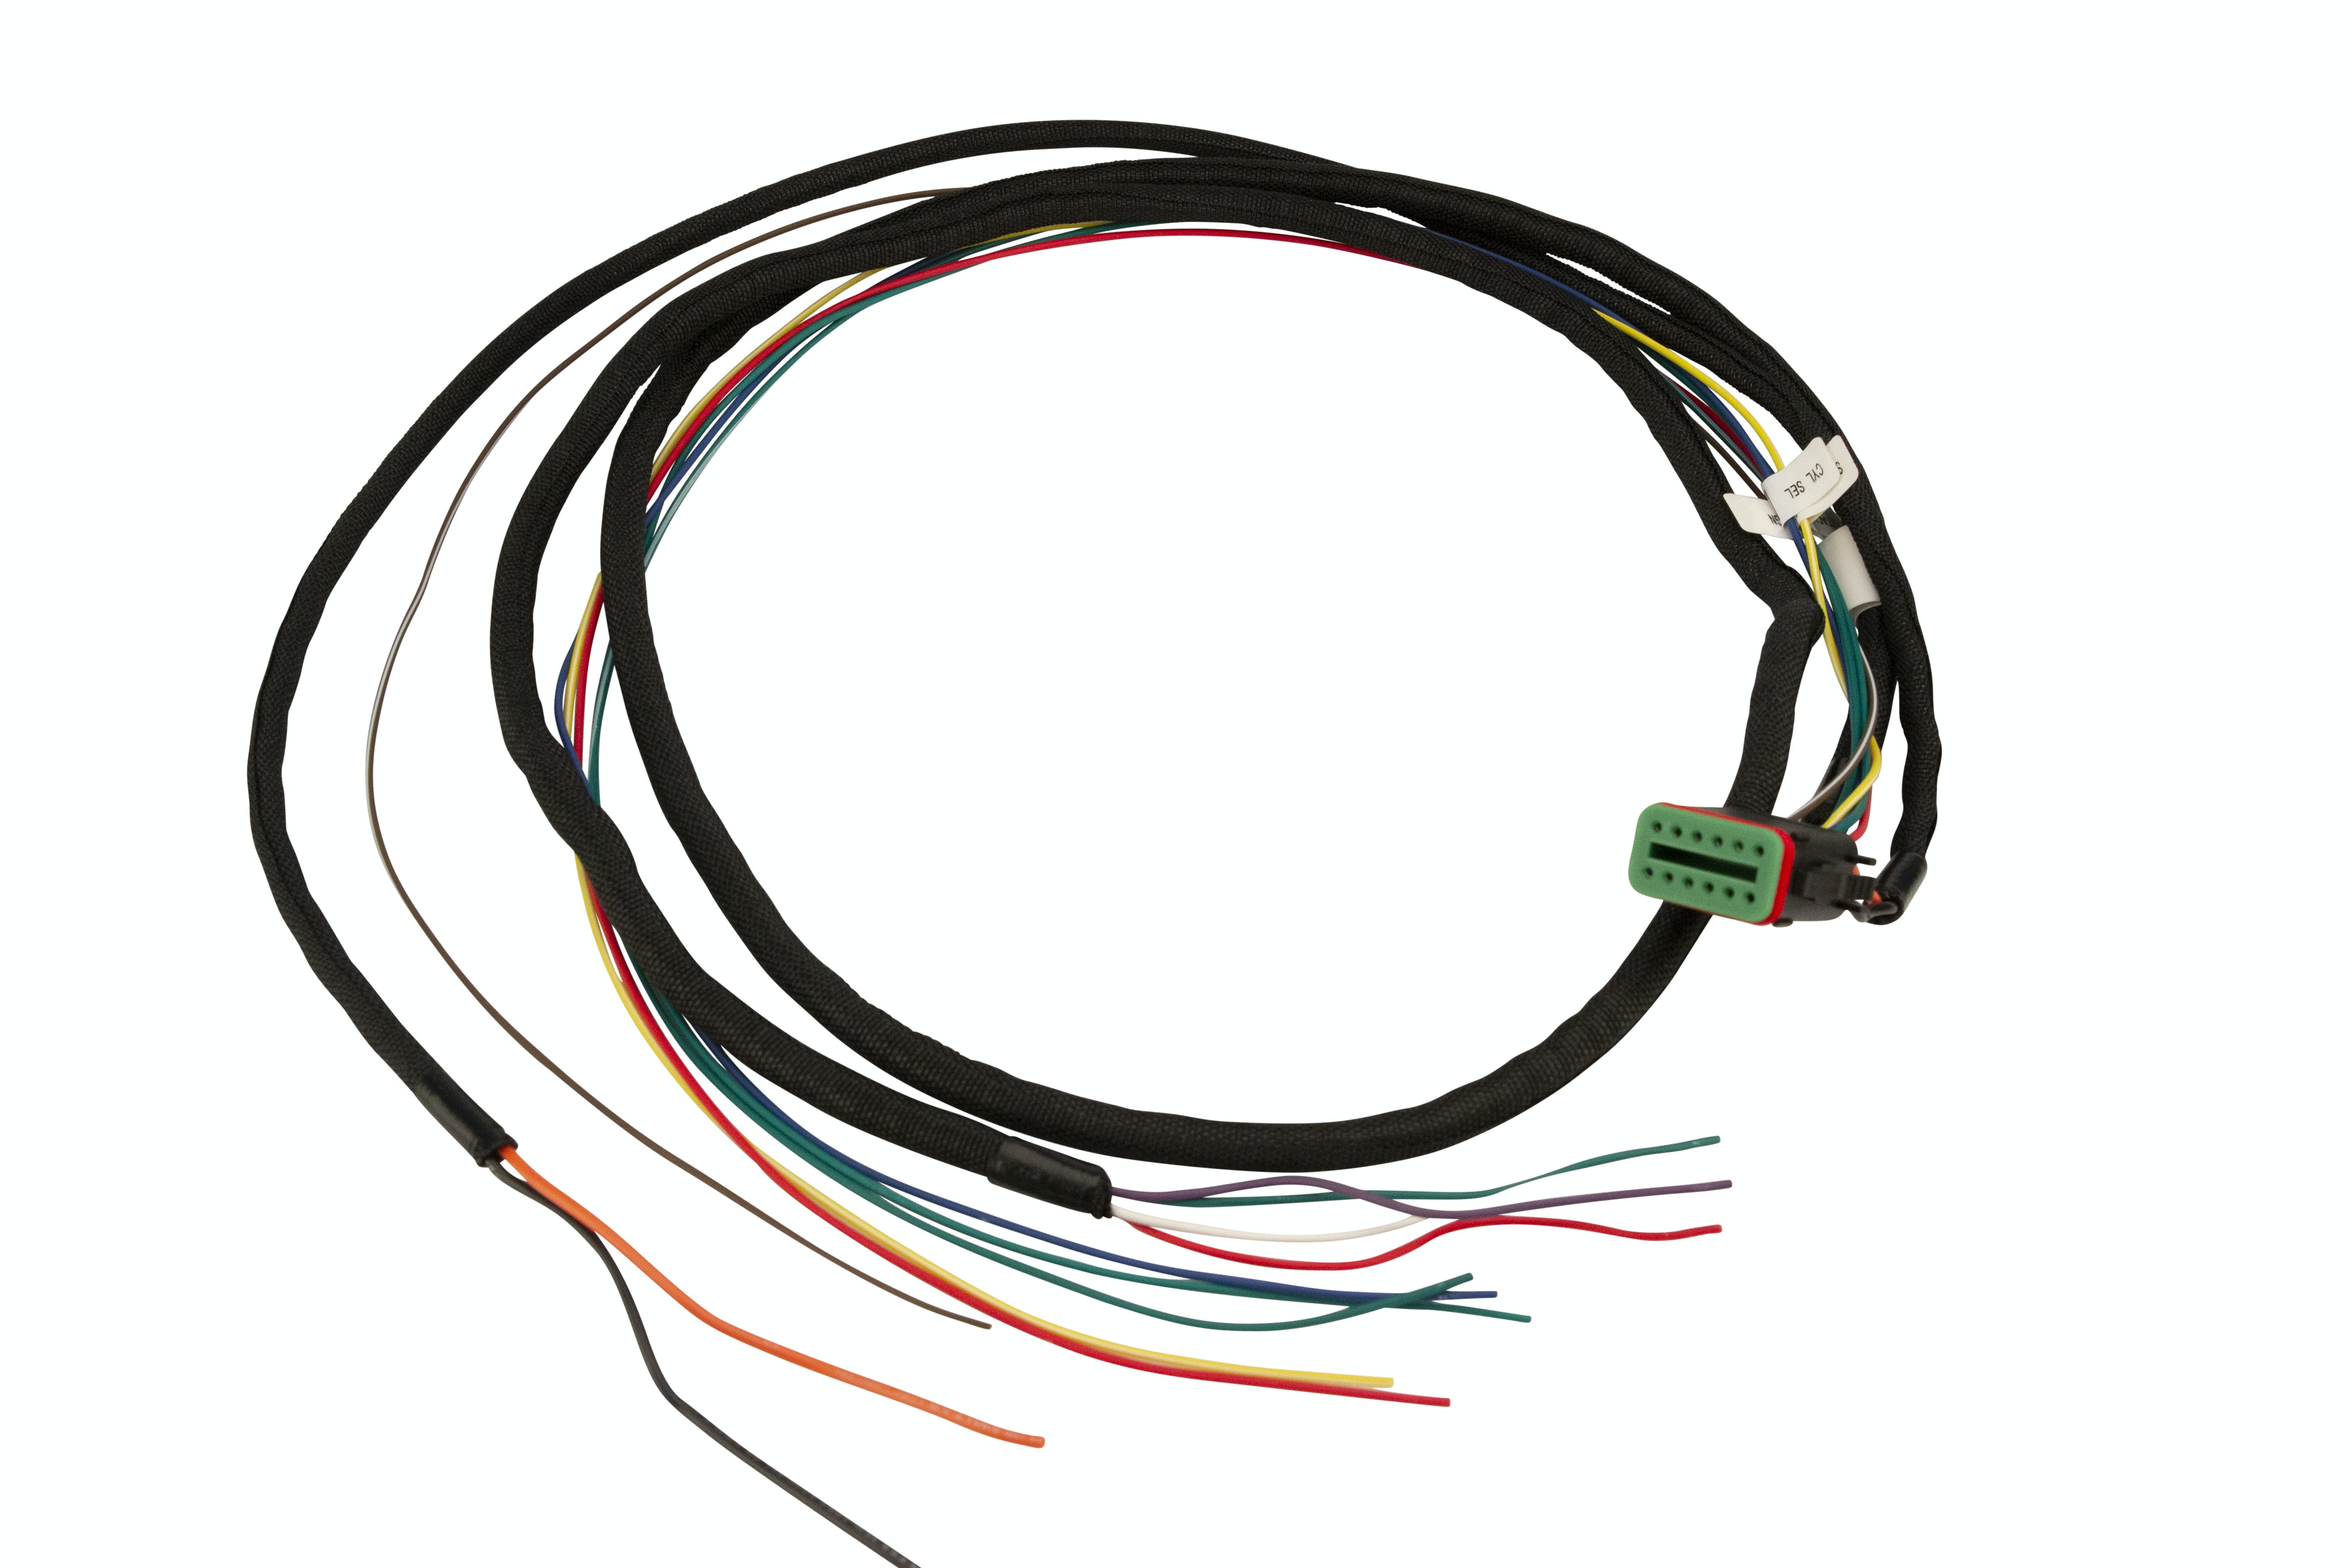 FAST - Fuel Air Spark Technology 7430-7700 E7 Ignition System Wiring Harness